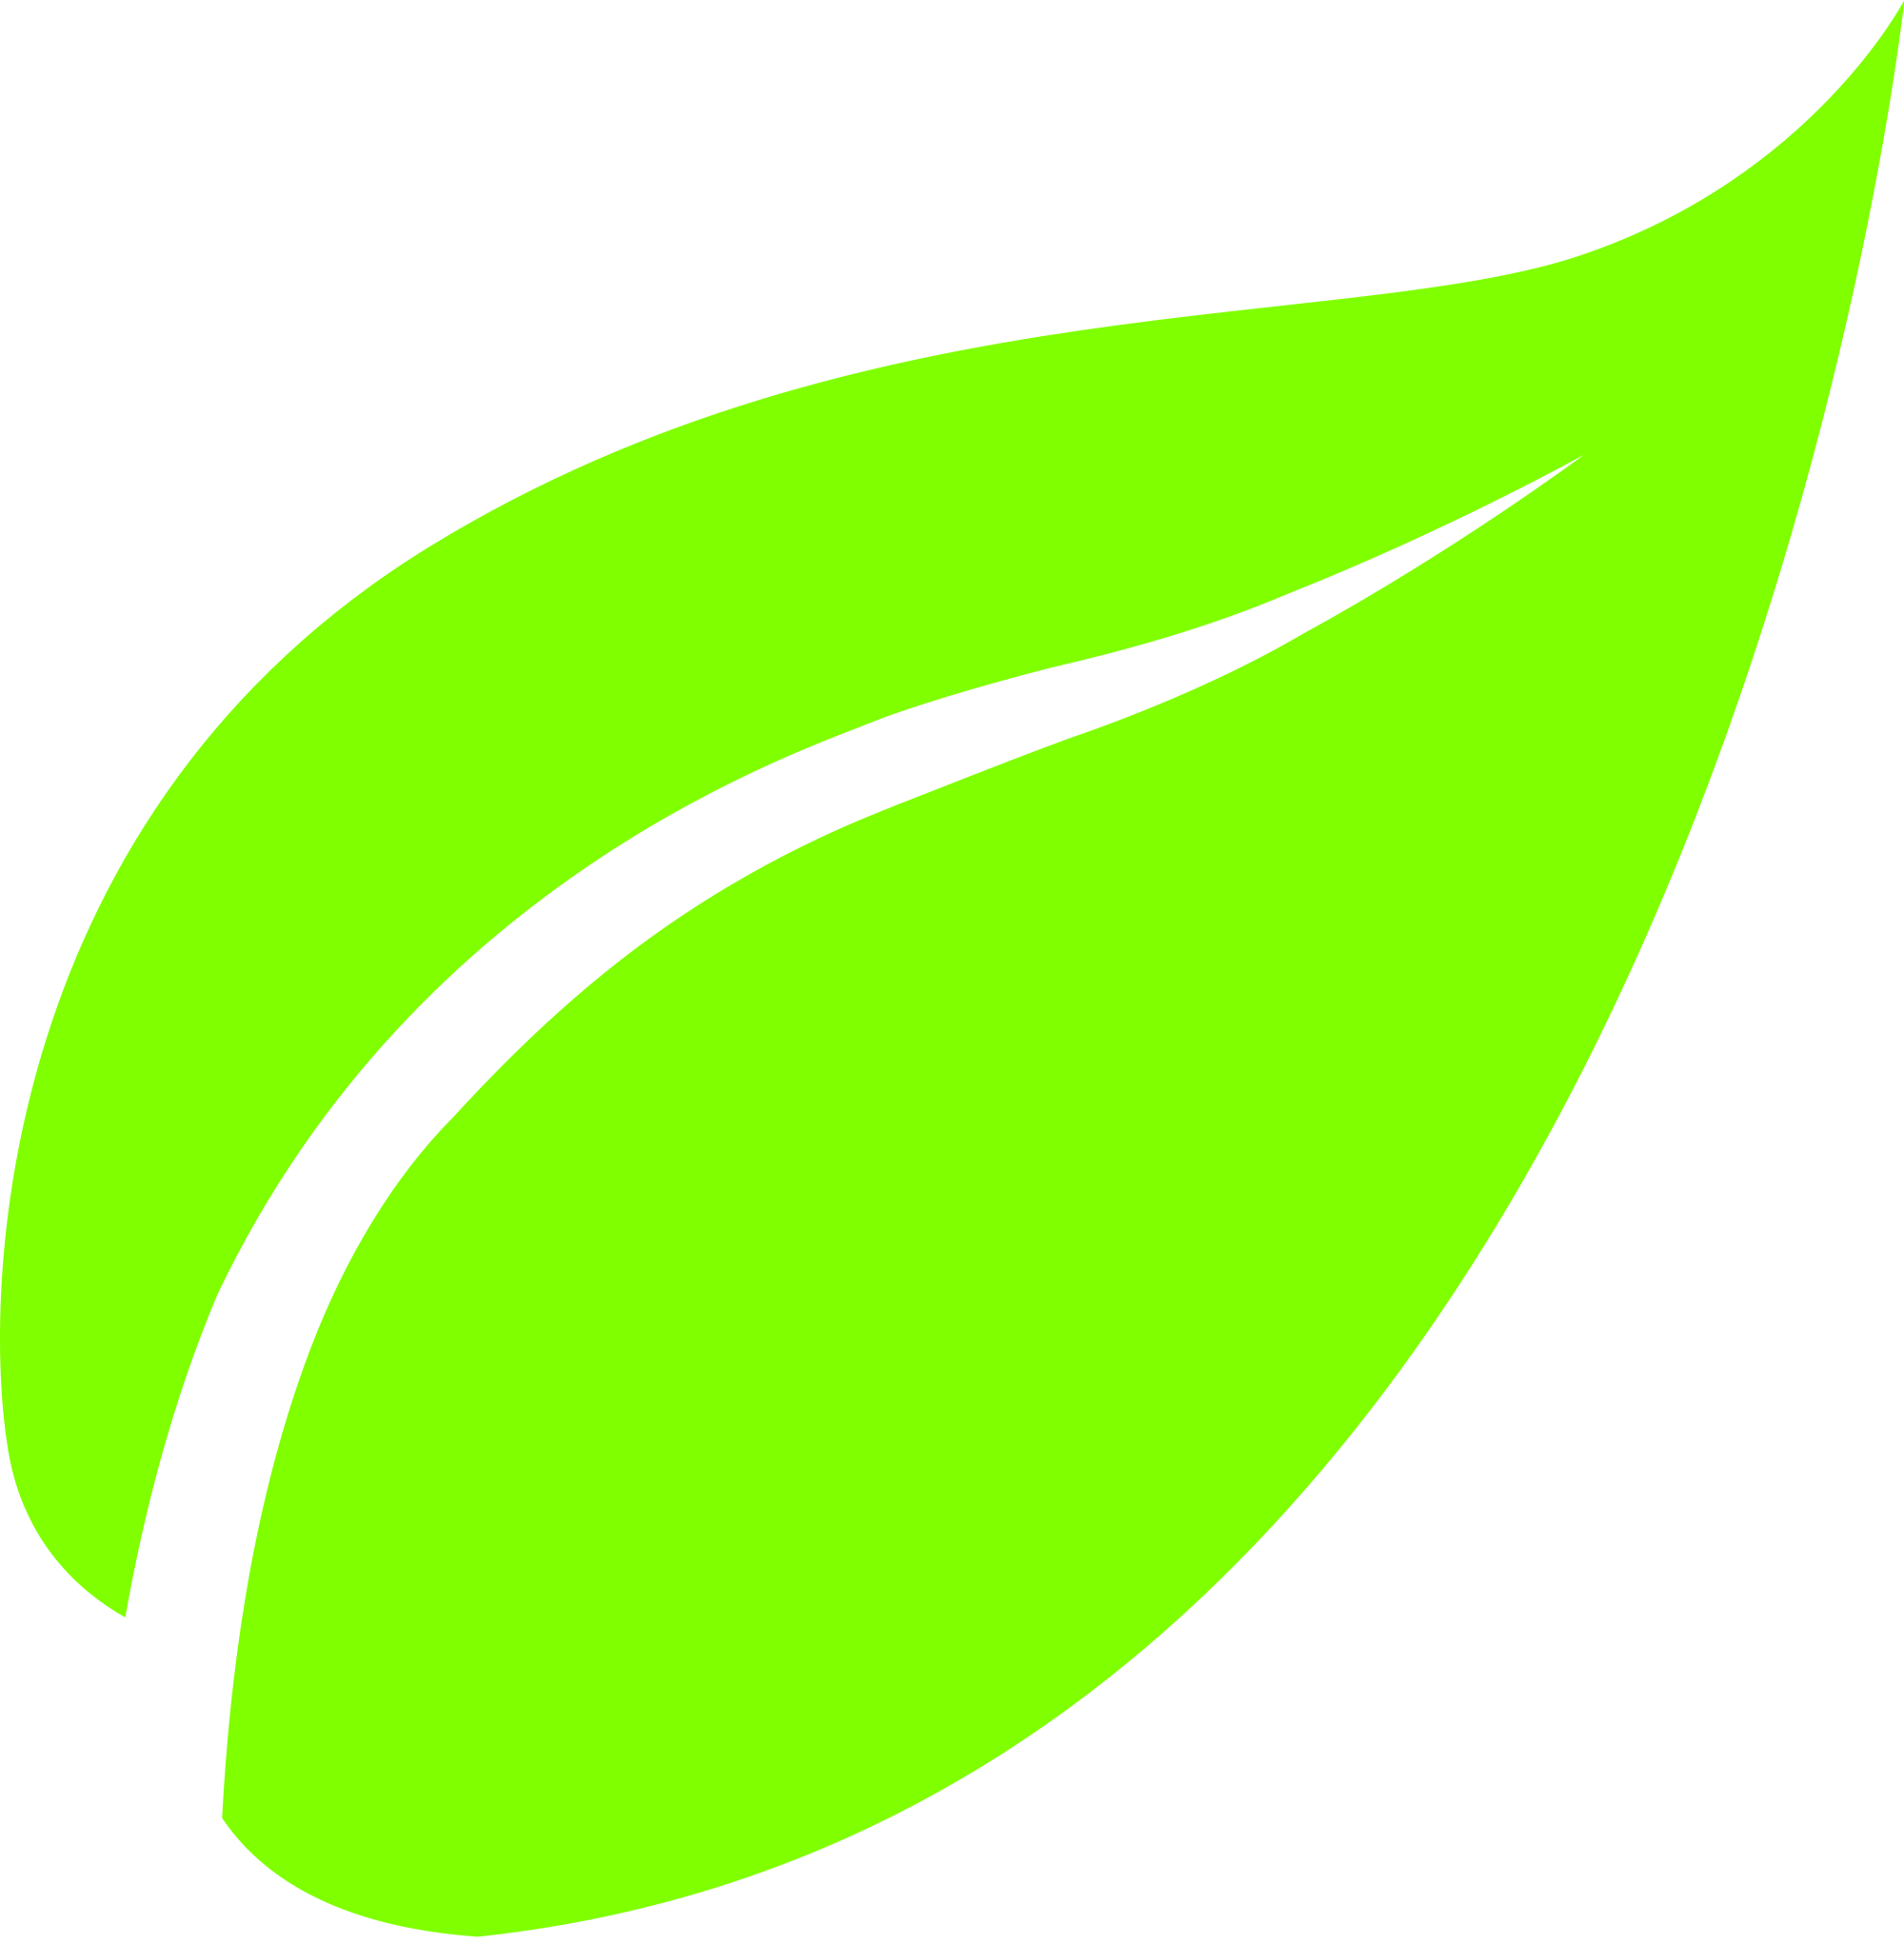 Green Leaf Vector - ClipArt Best